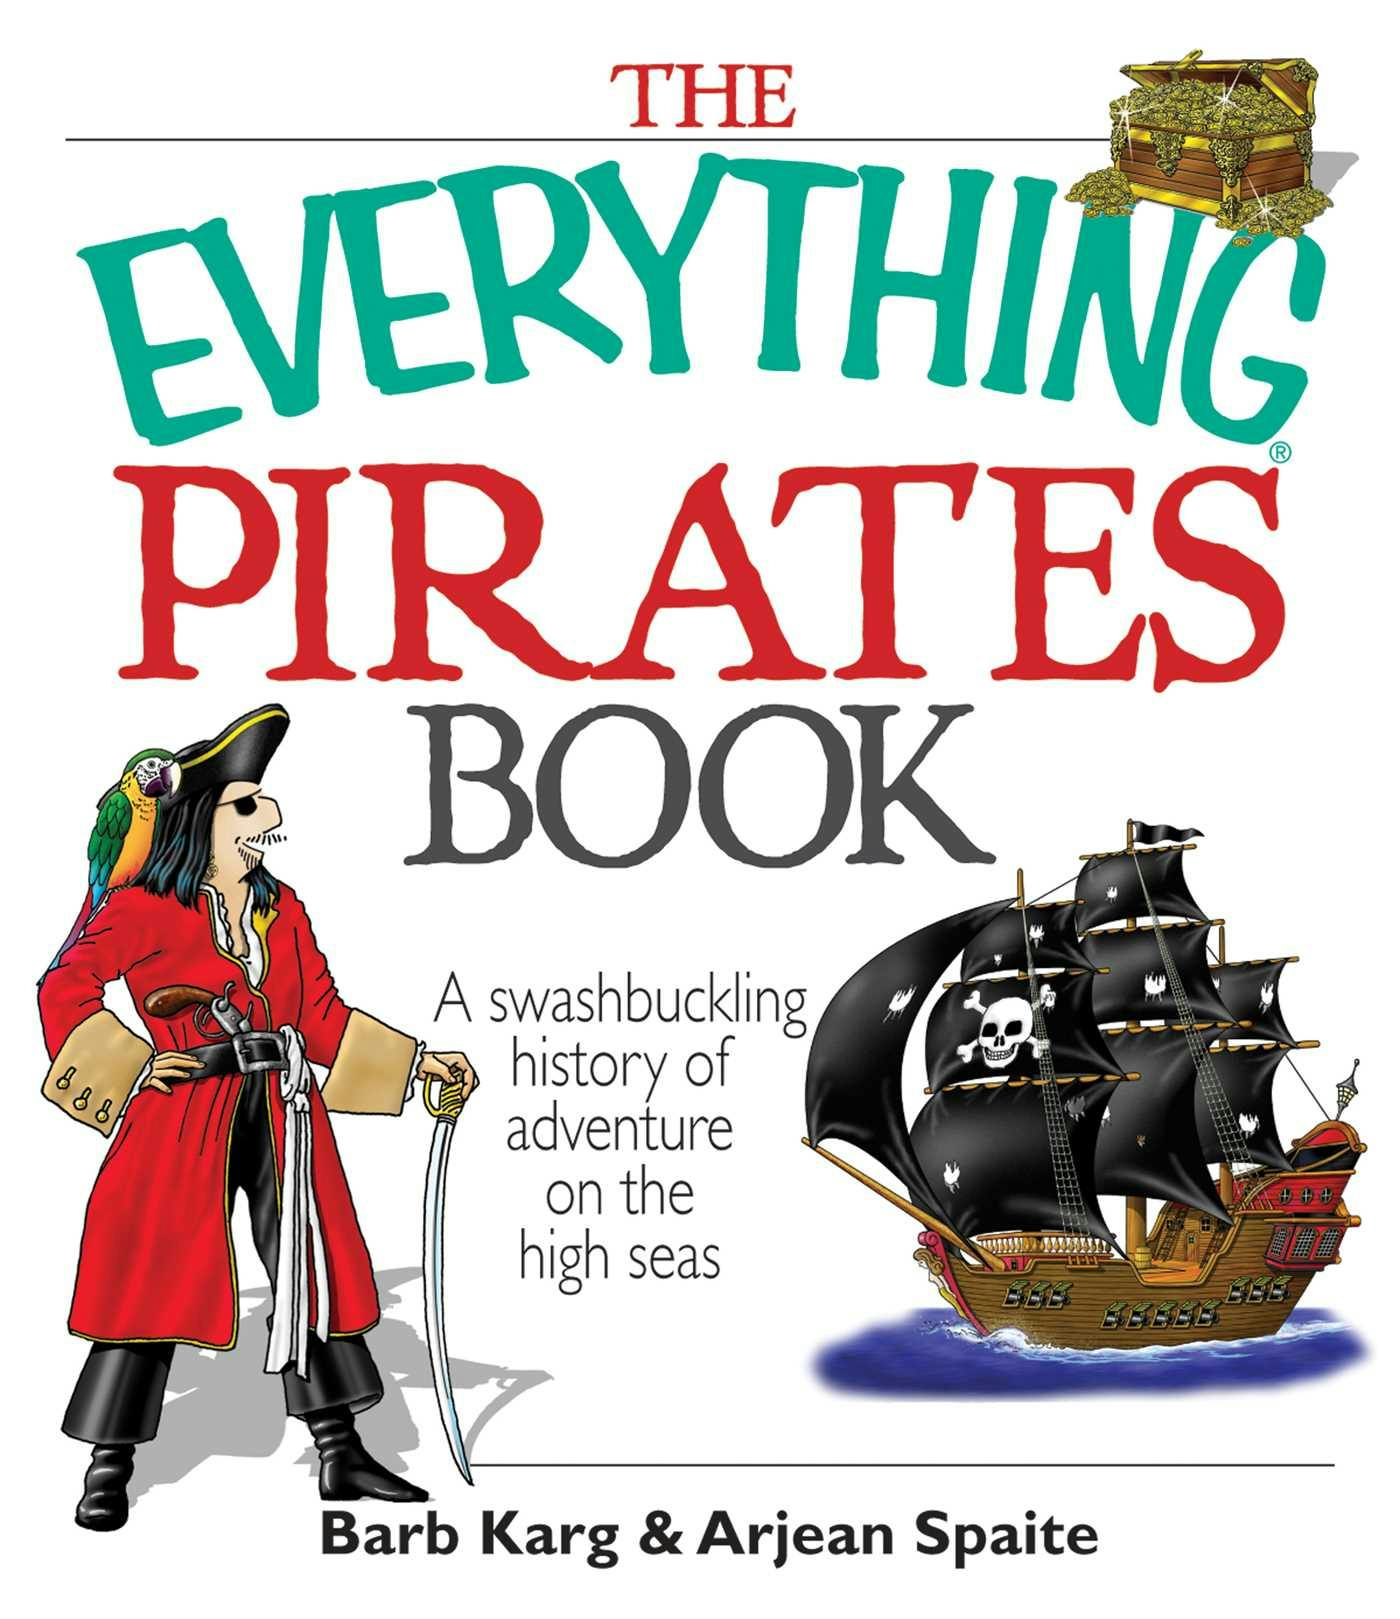 The Everything Pirates Book: A Swashbuckling History of Adventure on the High Seas - Arjean Spaite, Barb Karg